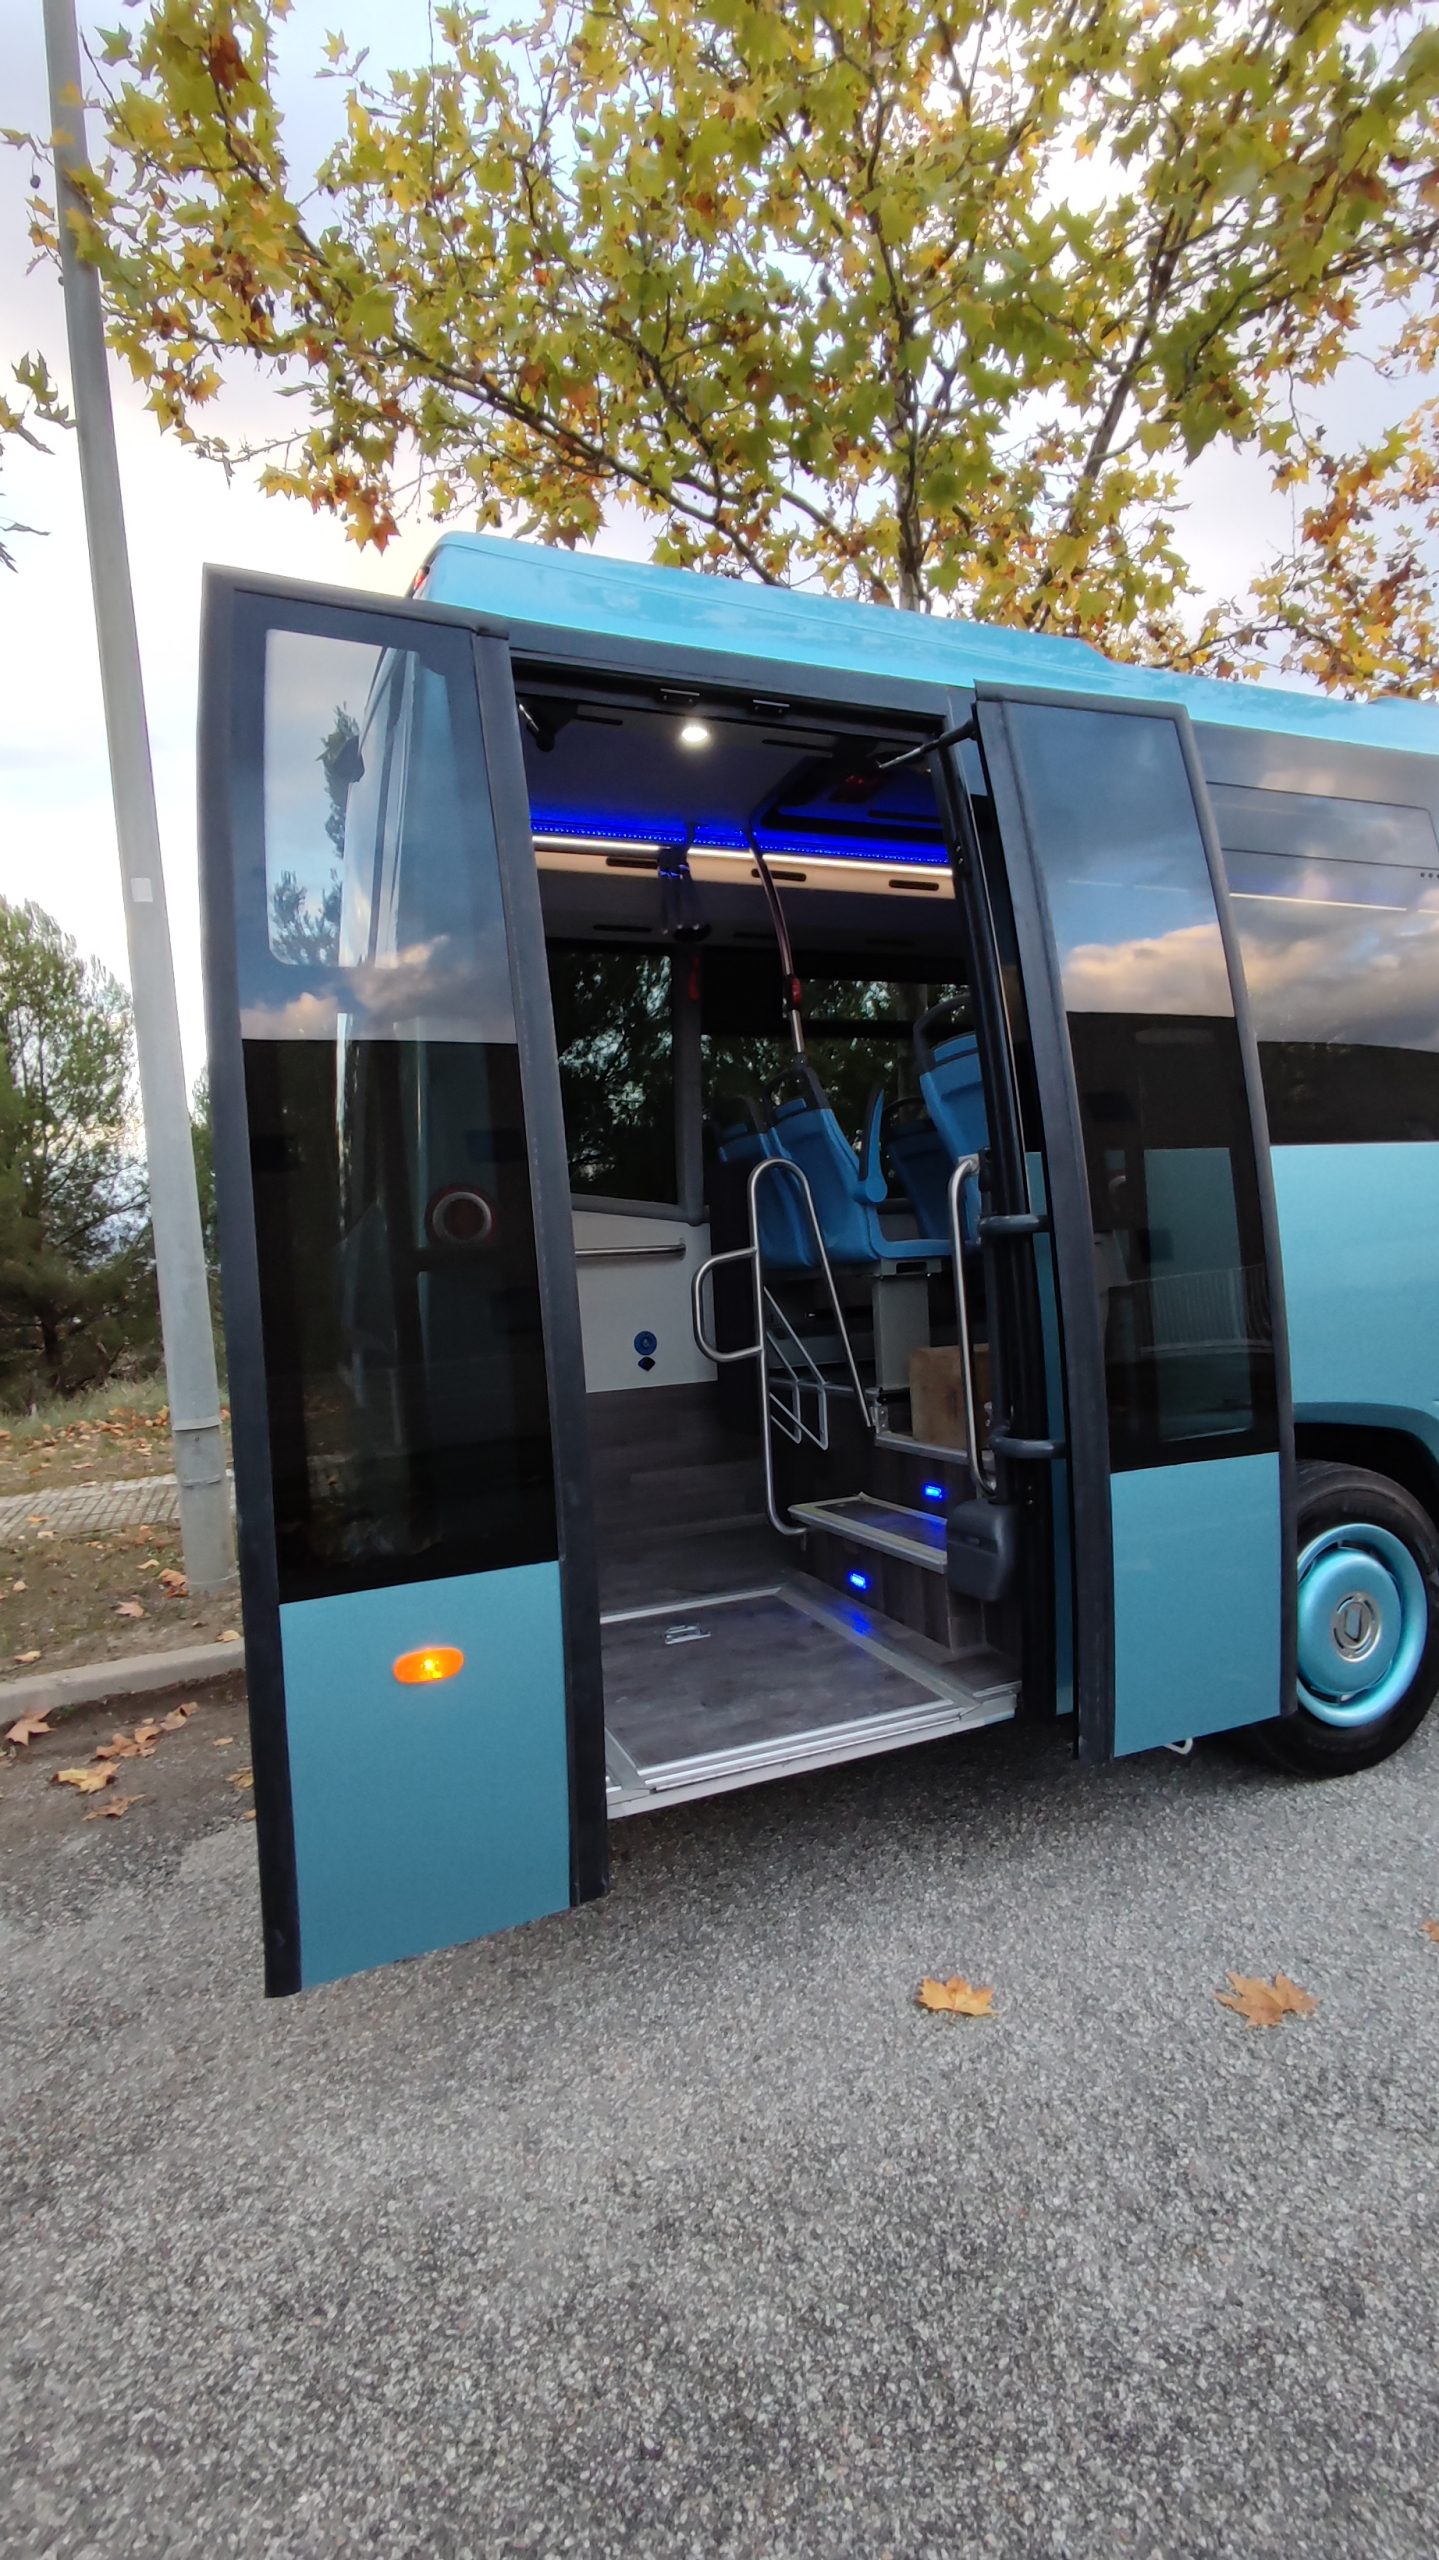 QEV Technologies and CAR-BUS.net successfully conclude the tests in Pyrénées Industrials with the eURBAN electric minibus, the first electric minibus to circulate in Andorra., QEV